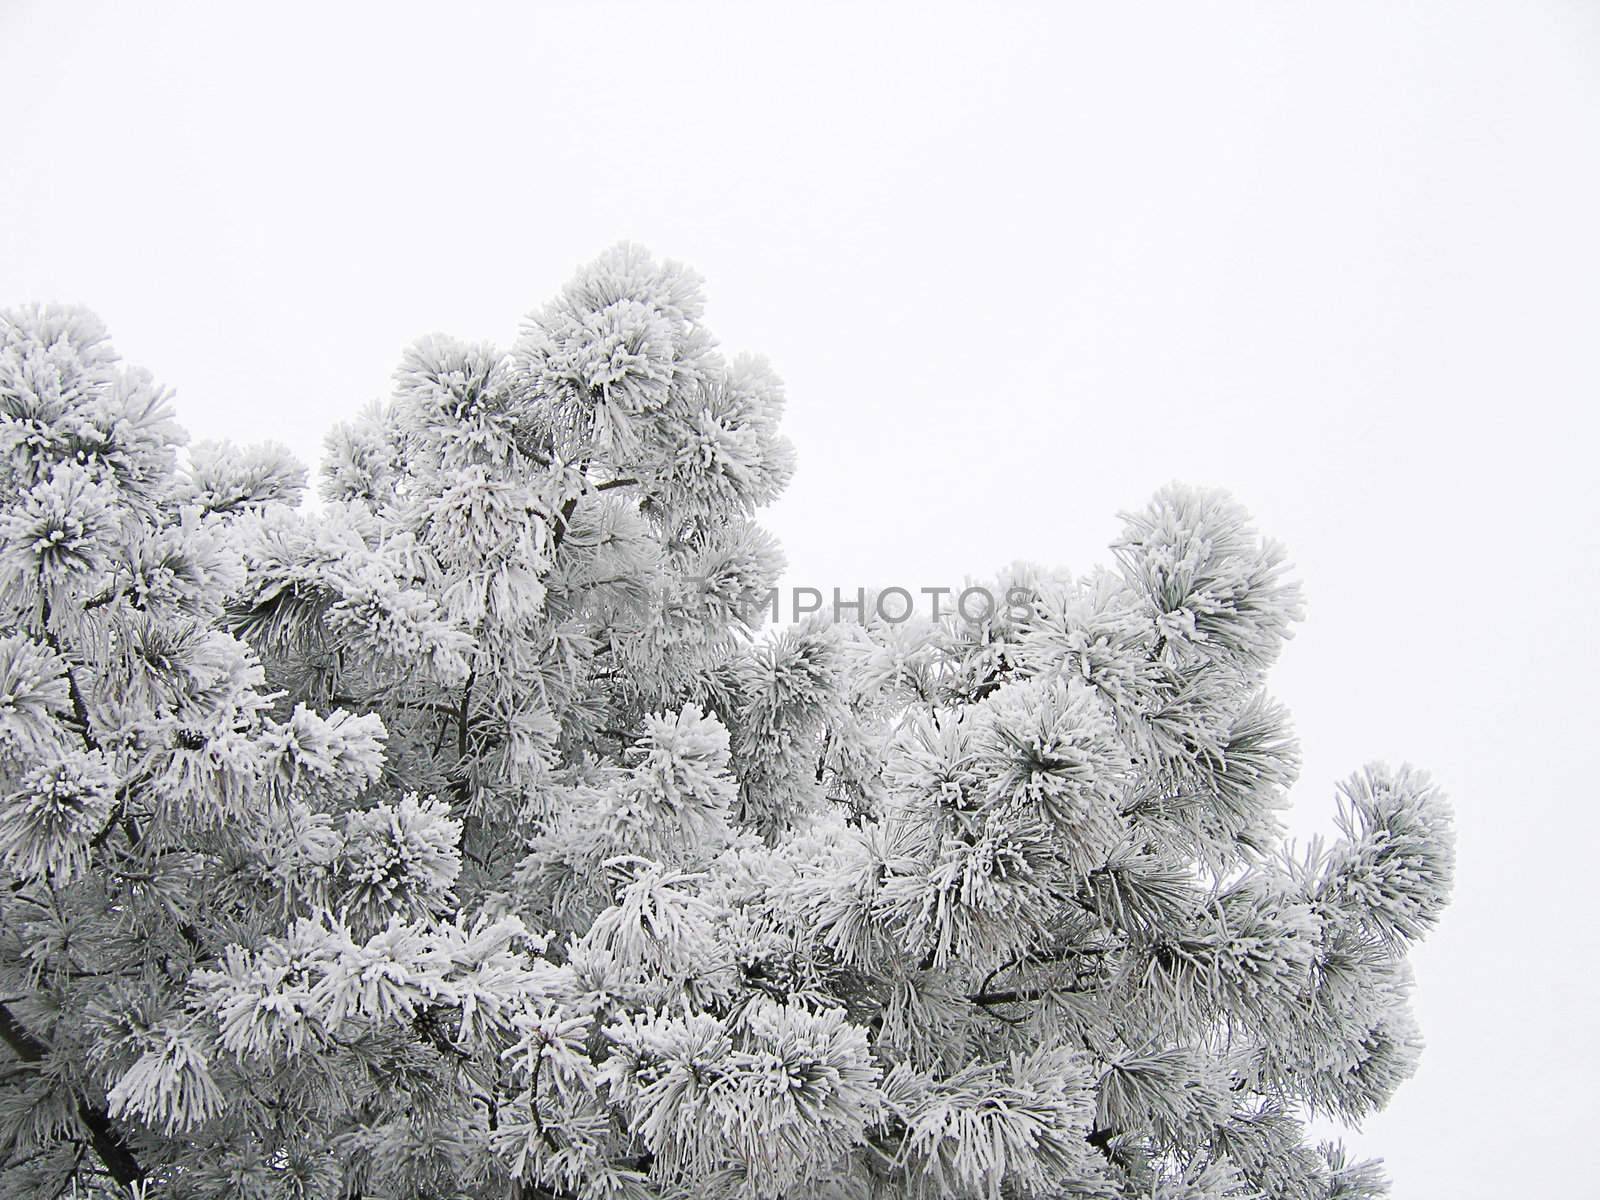 Snow on the pine tree branches over white